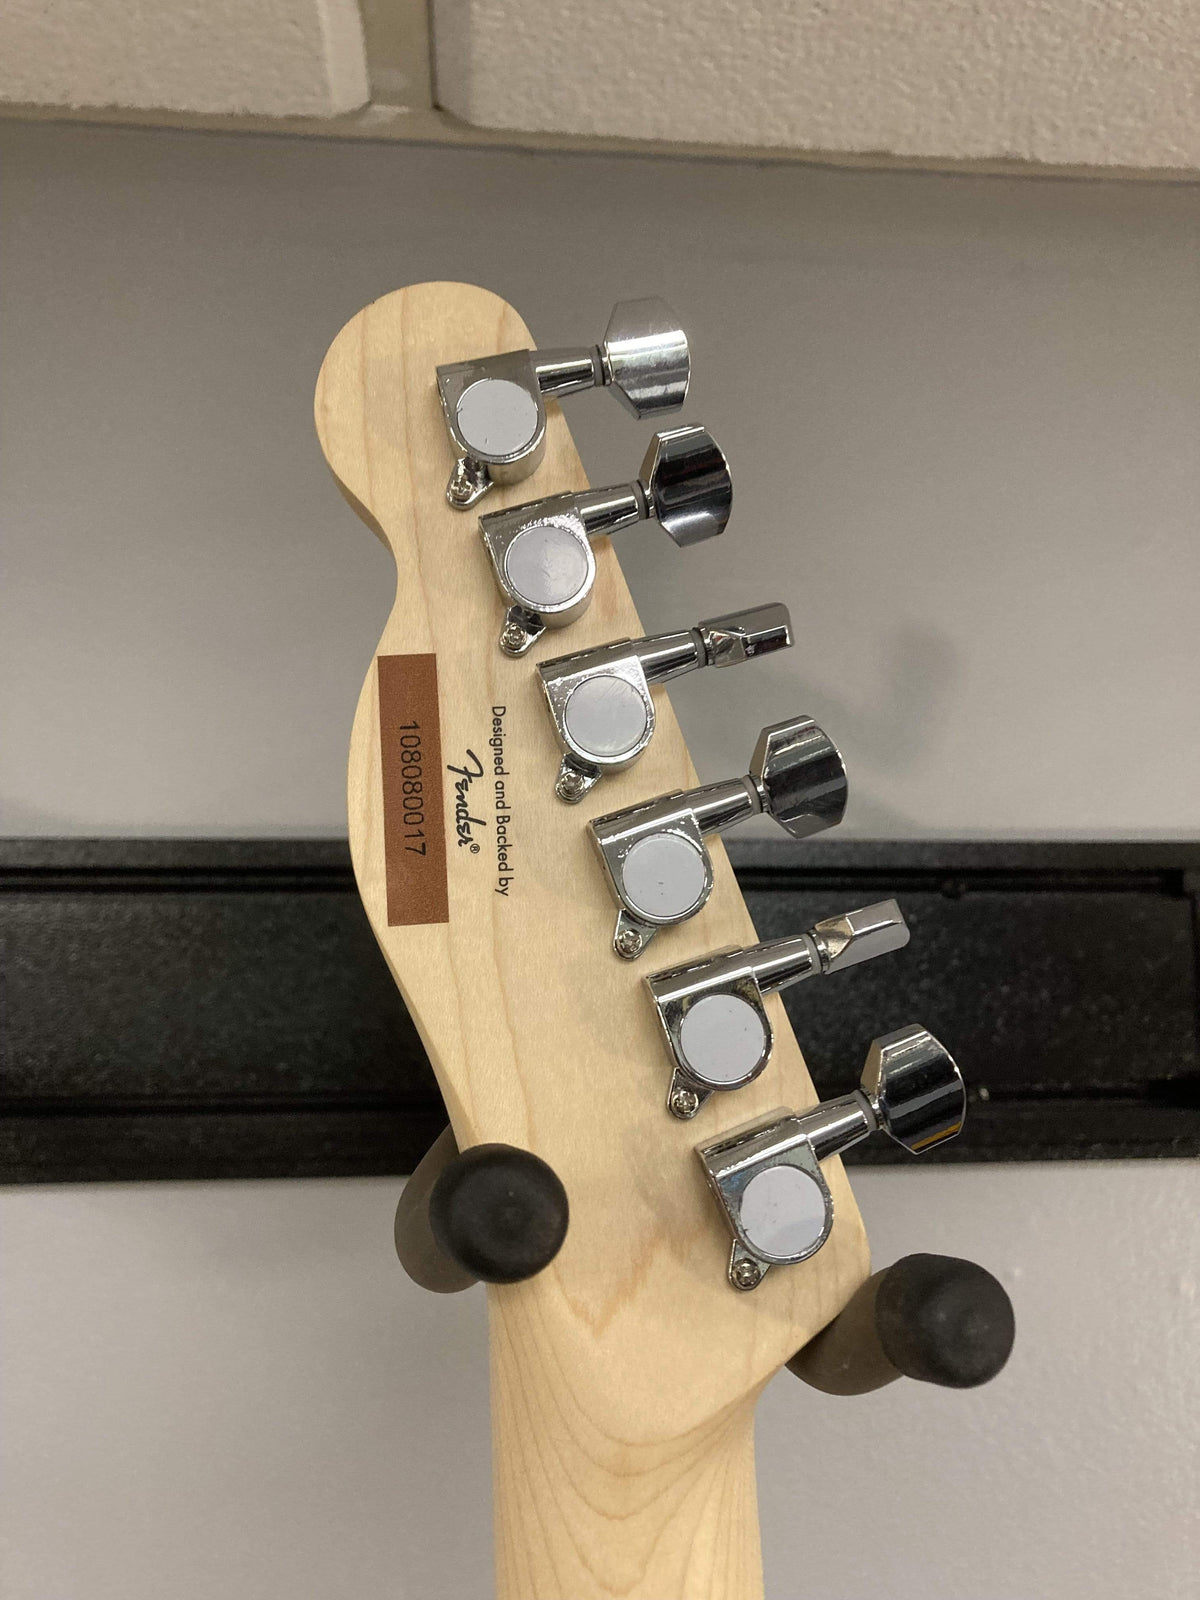 Squier Affinity Telecaster BSB Guitars on Main